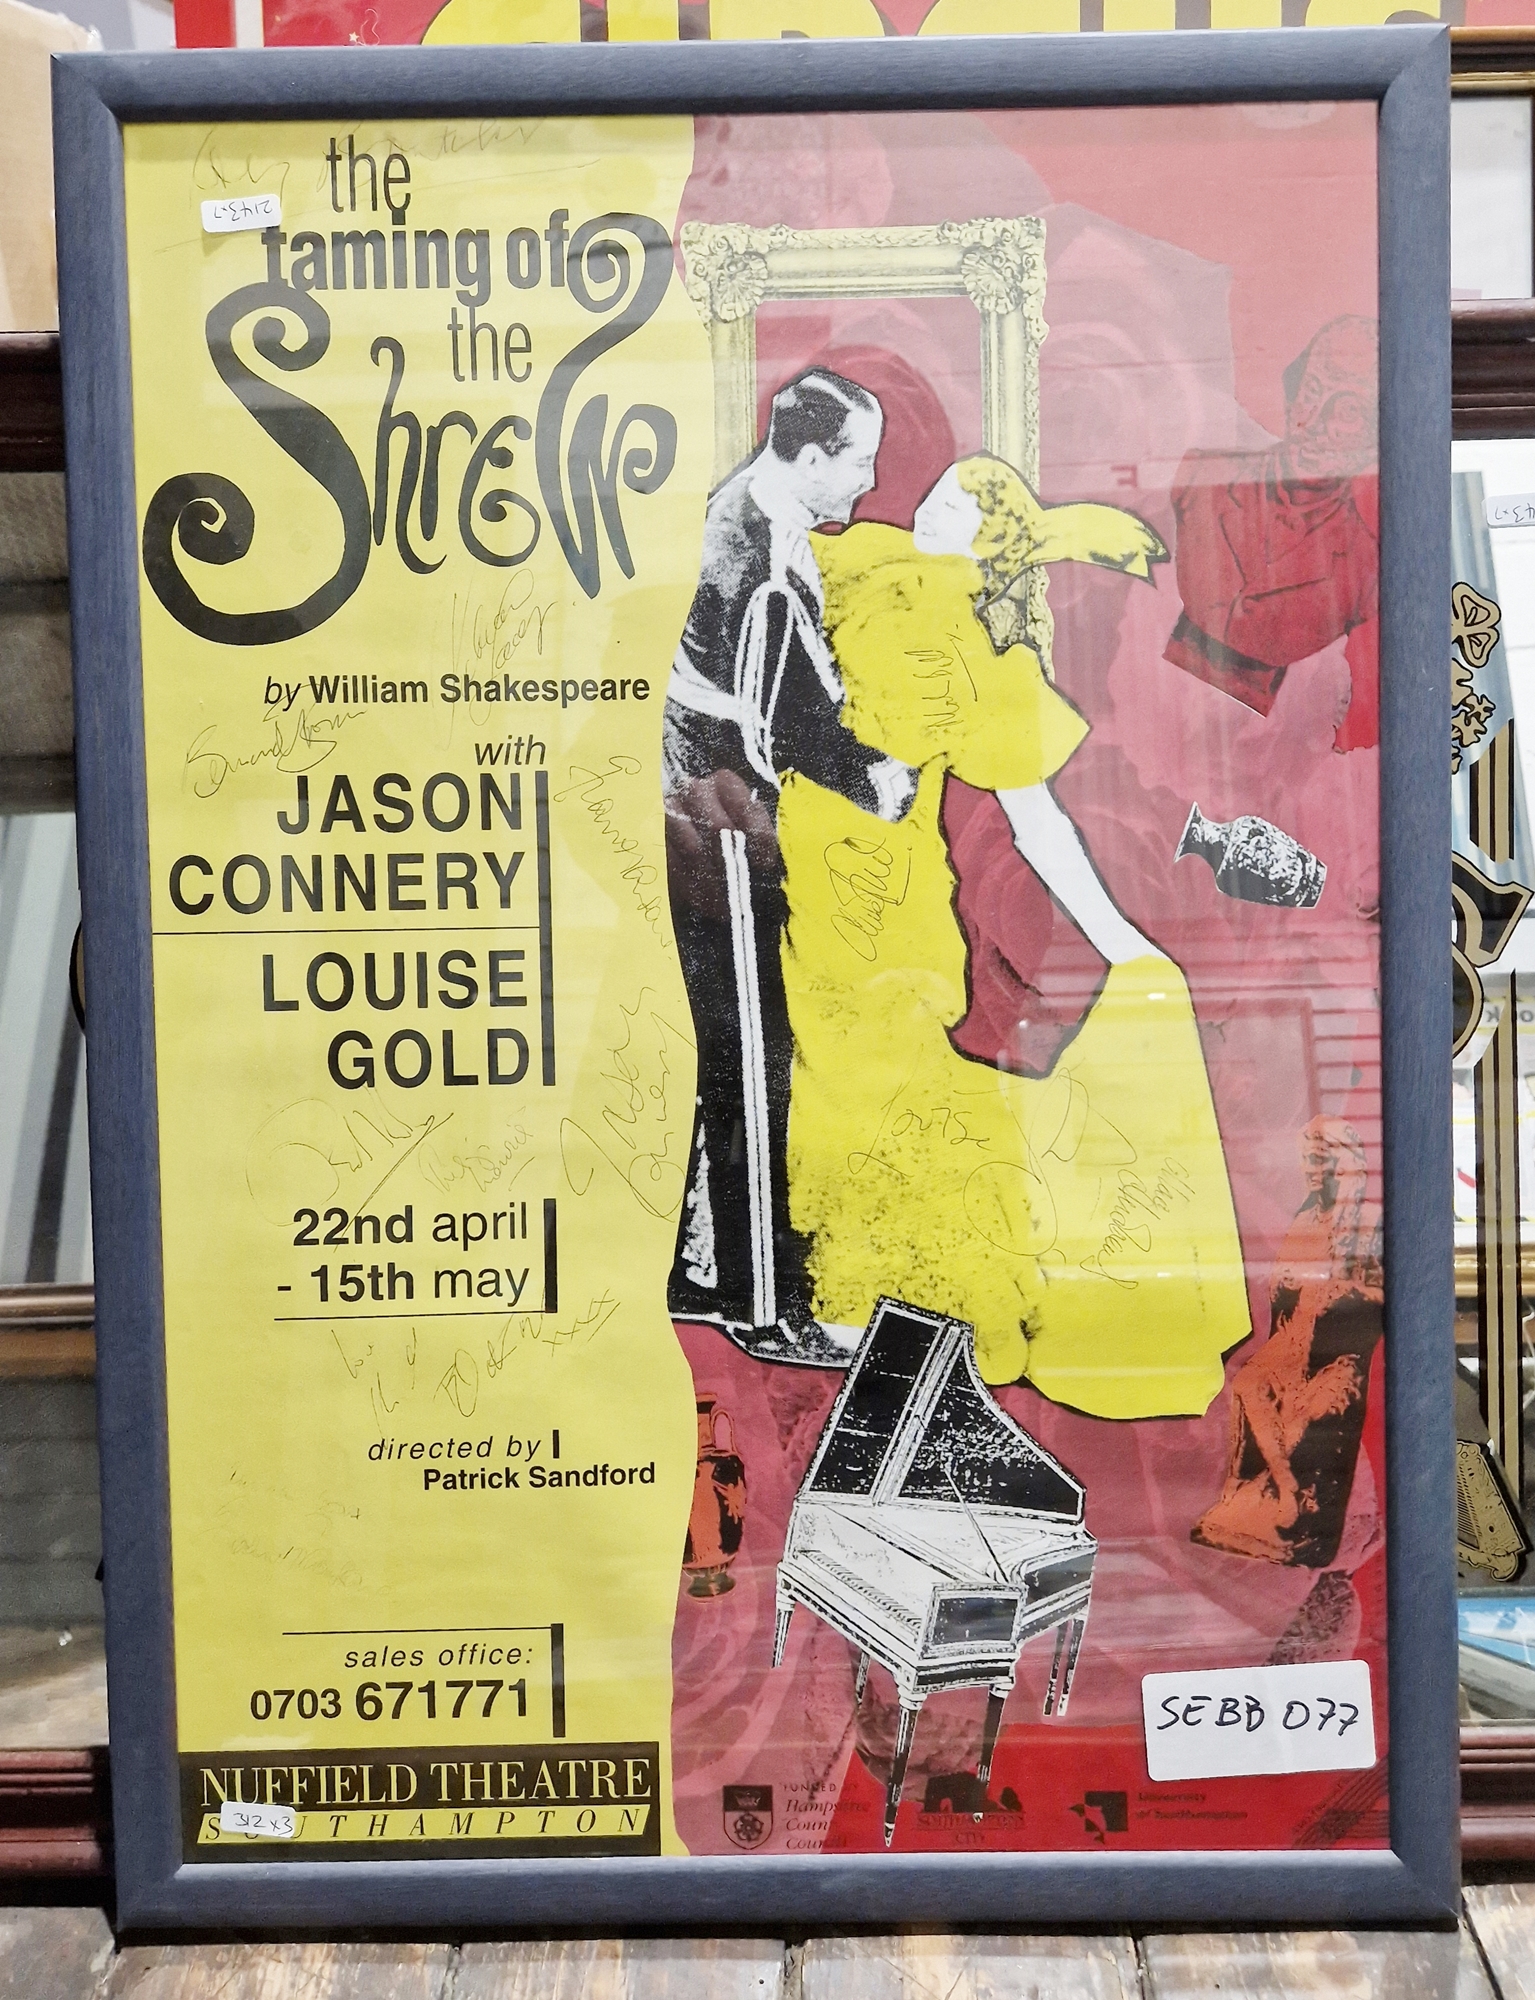 Circus poster for Sir Robert Fossett's Circus, a theatre poster for The Taming of the Shrew, - Image 6 of 7